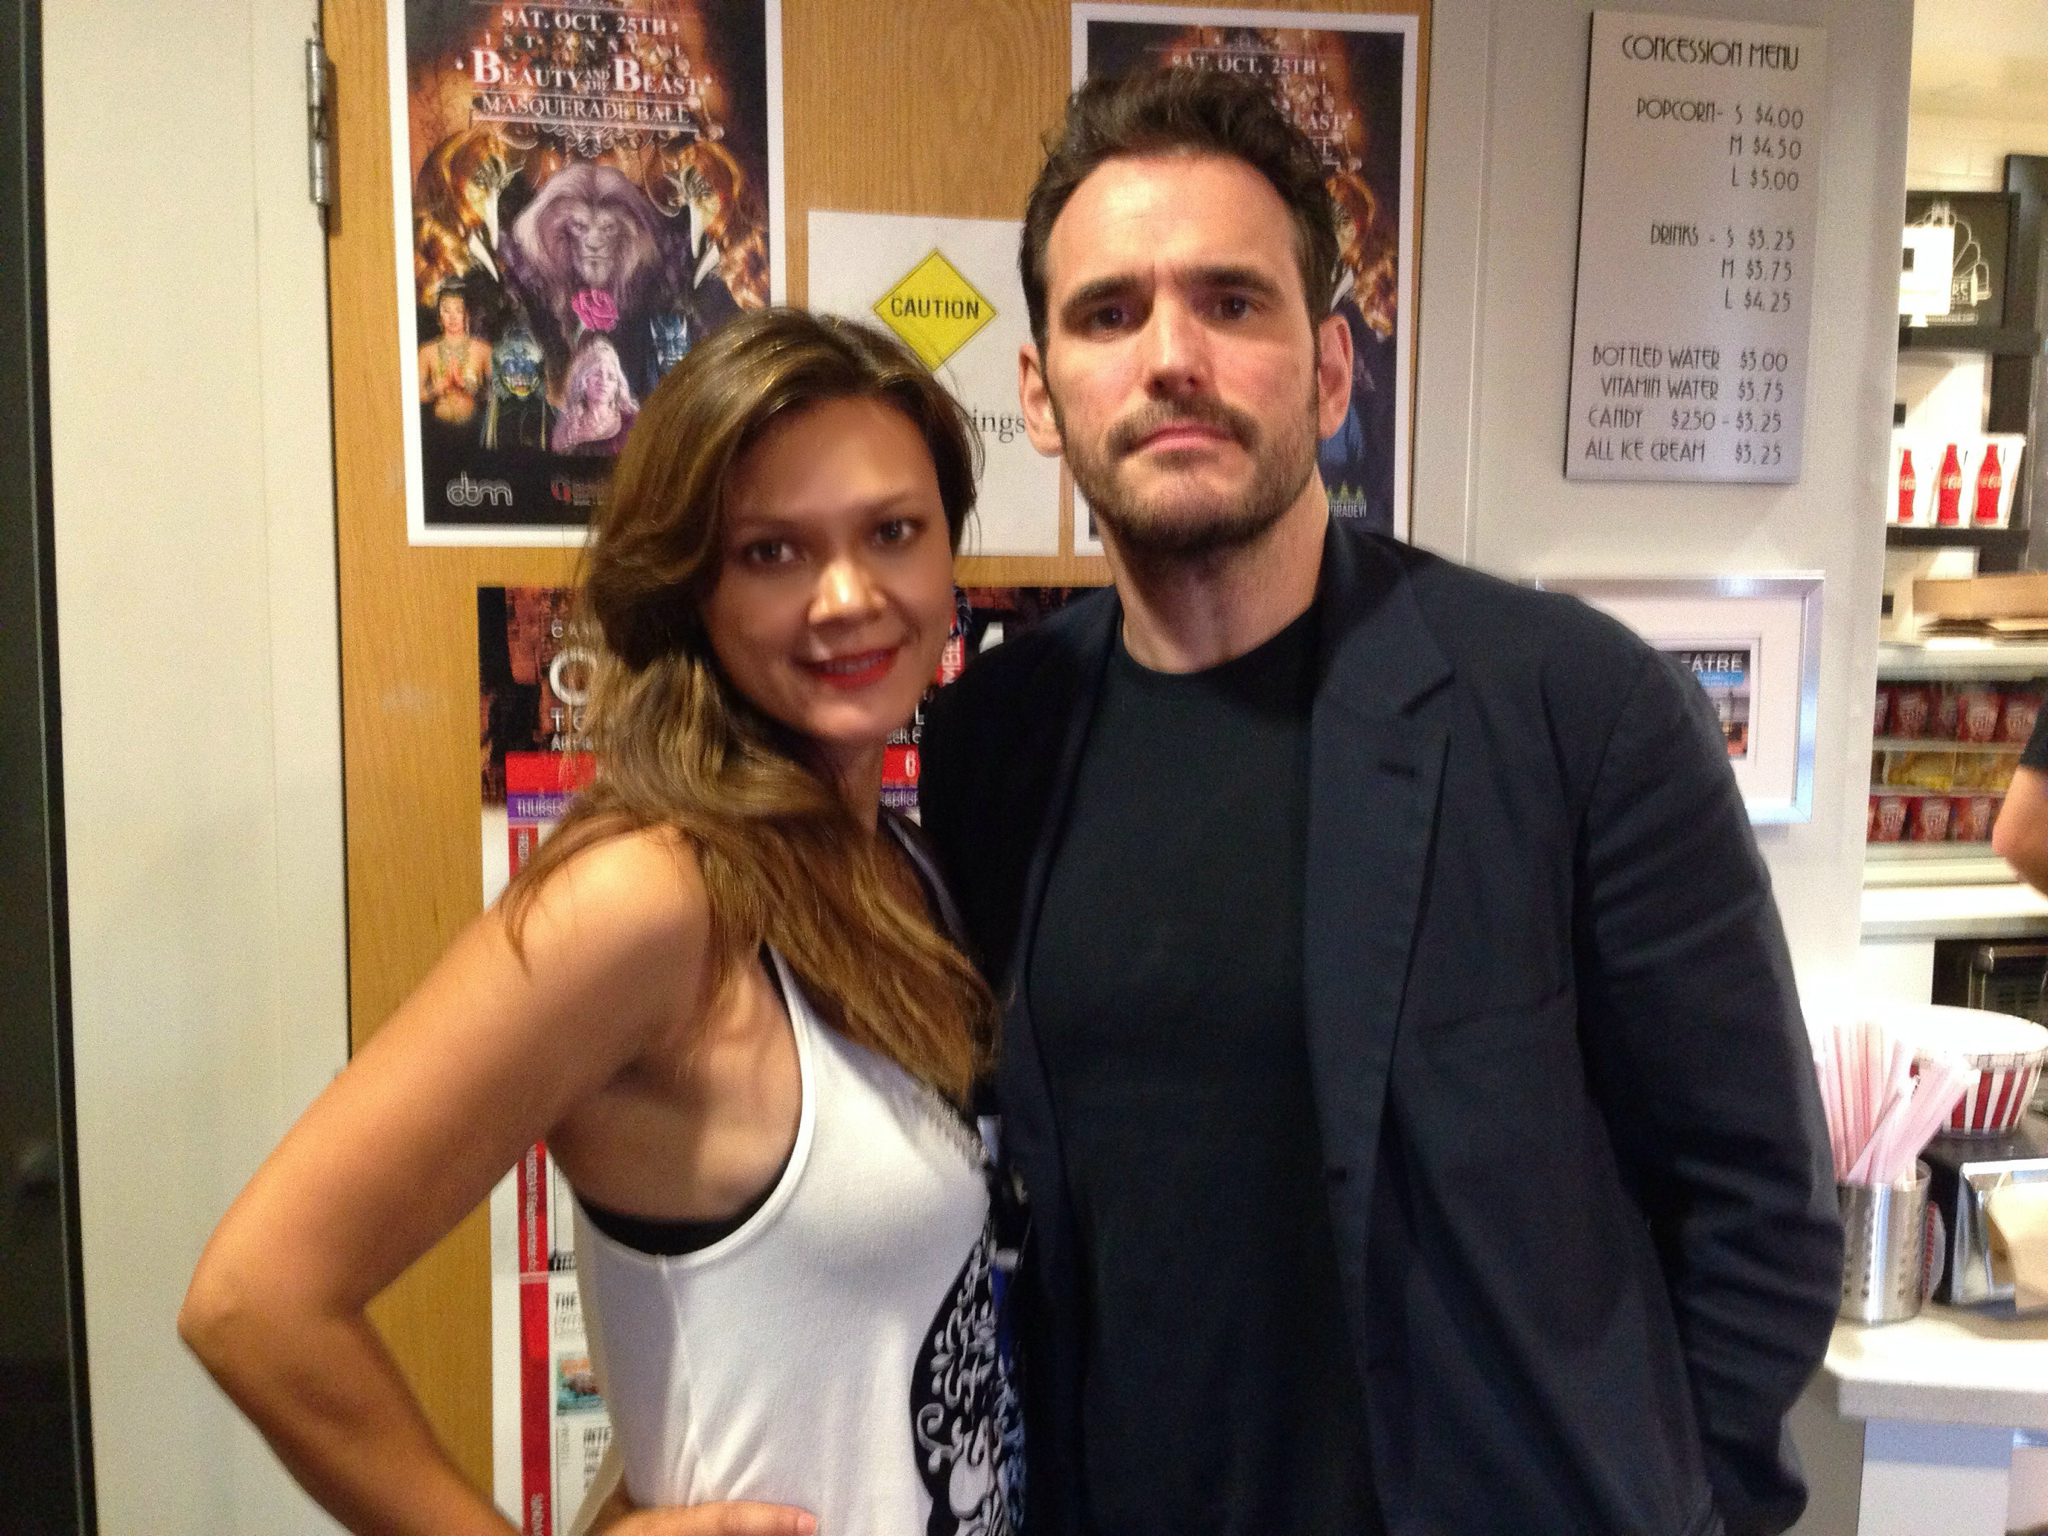 Kimberly Pal and Matt Dillon at The Cambodian Town Film Festival in 2014.